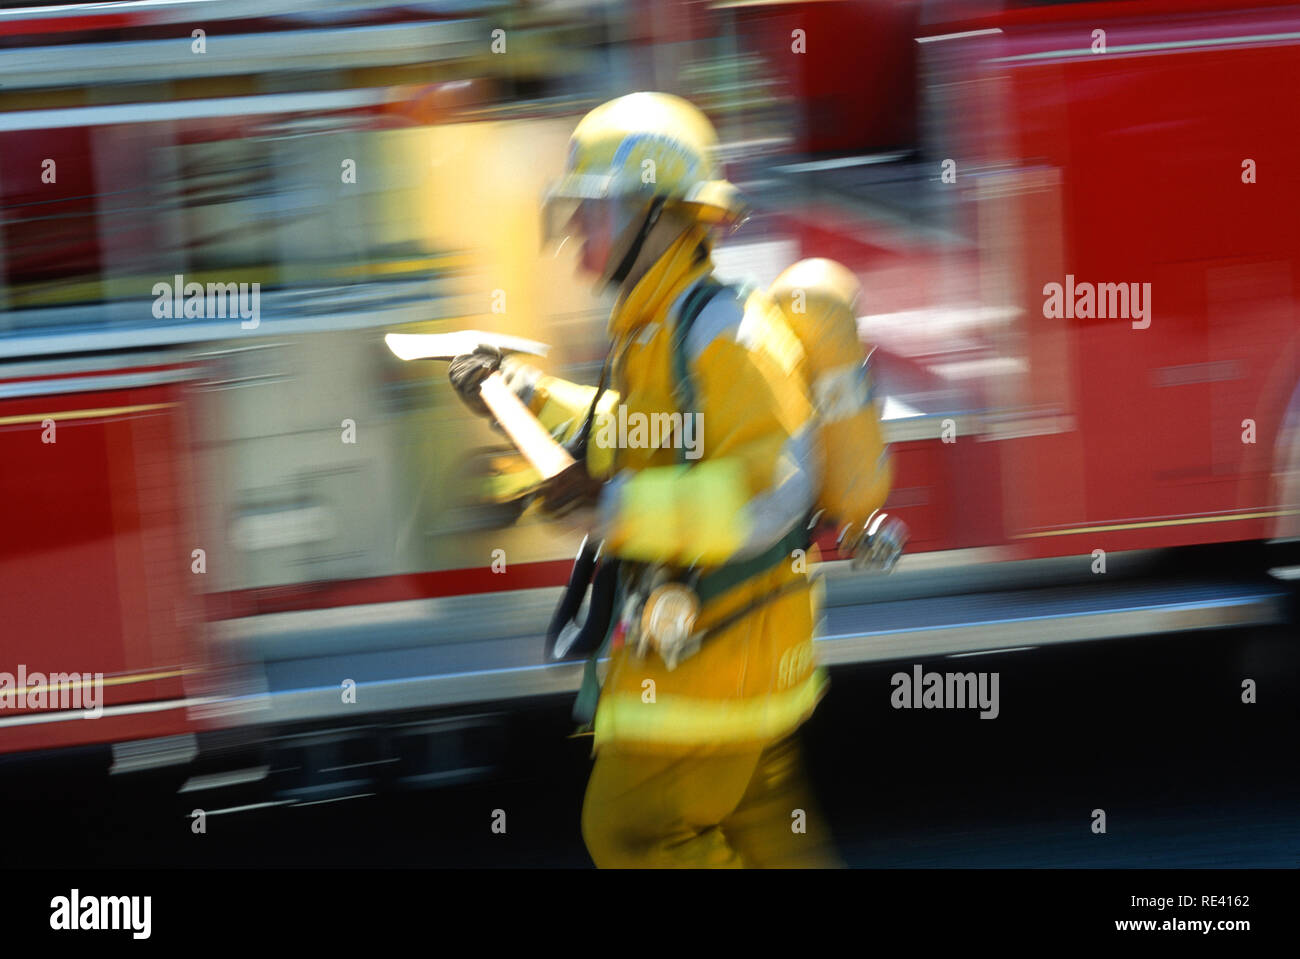 A fireman in full turnouts is carrying an axe at a fire site, USA Stock Photo